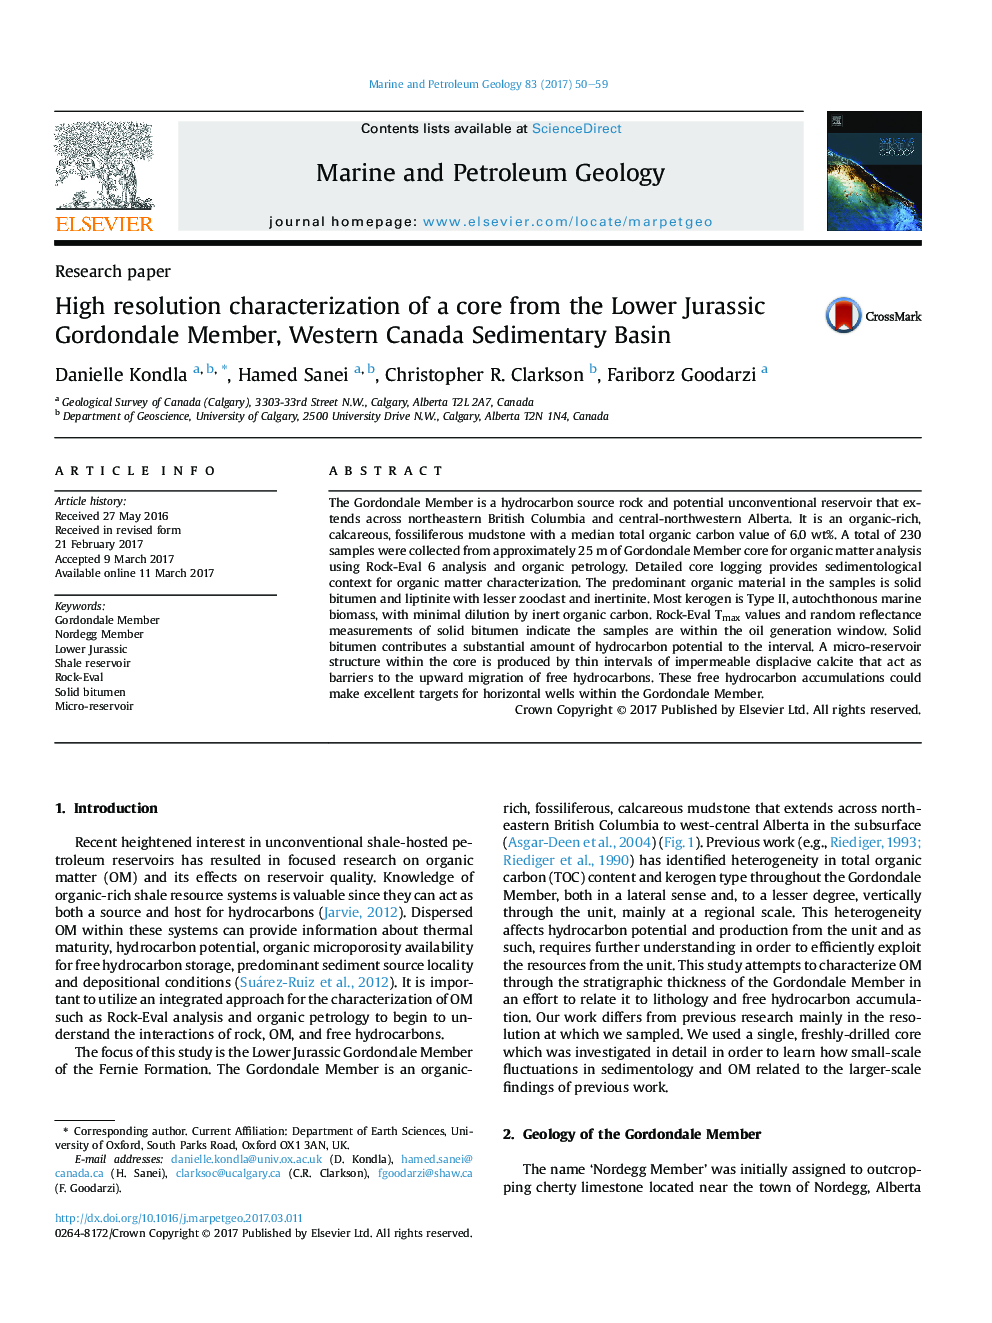 High resolution characterization of a core from the Lower Jurassic Gordondale Member, Western Canada Sedimentary Basin